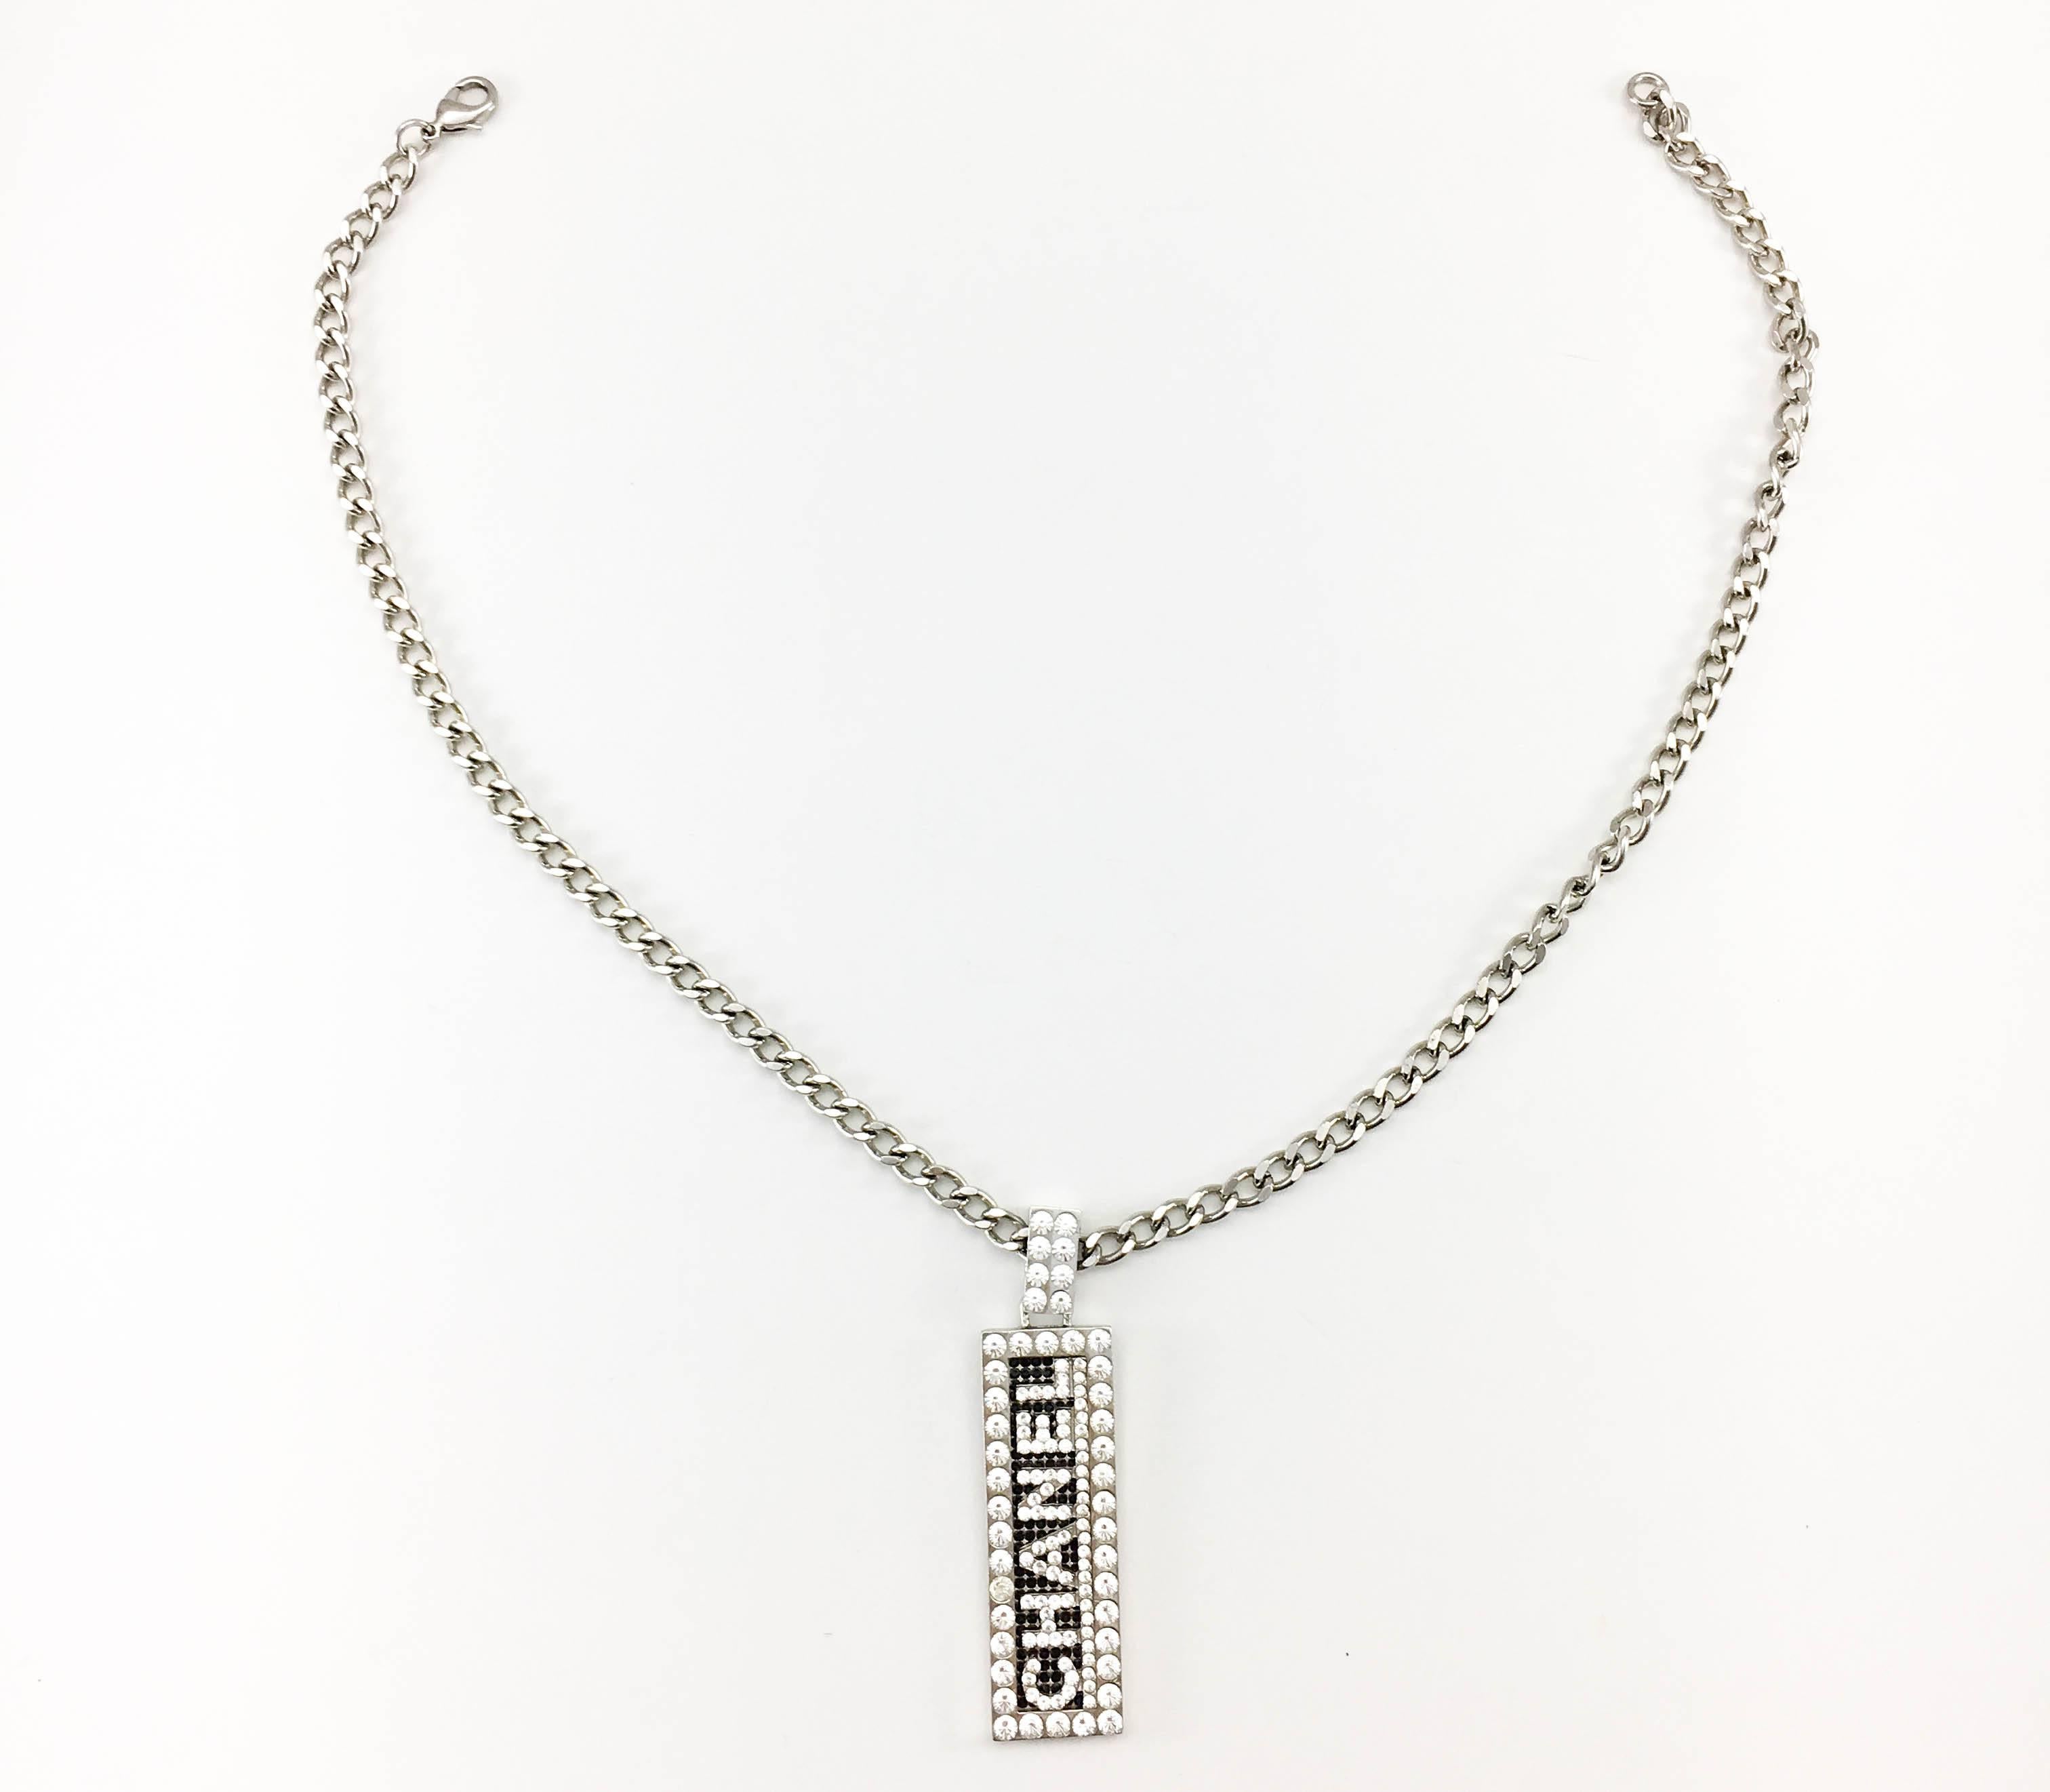 2003 Chanel Necklace With Rhinestone Chanel Plaque Pendant In Excellent Condition In London, Chelsea